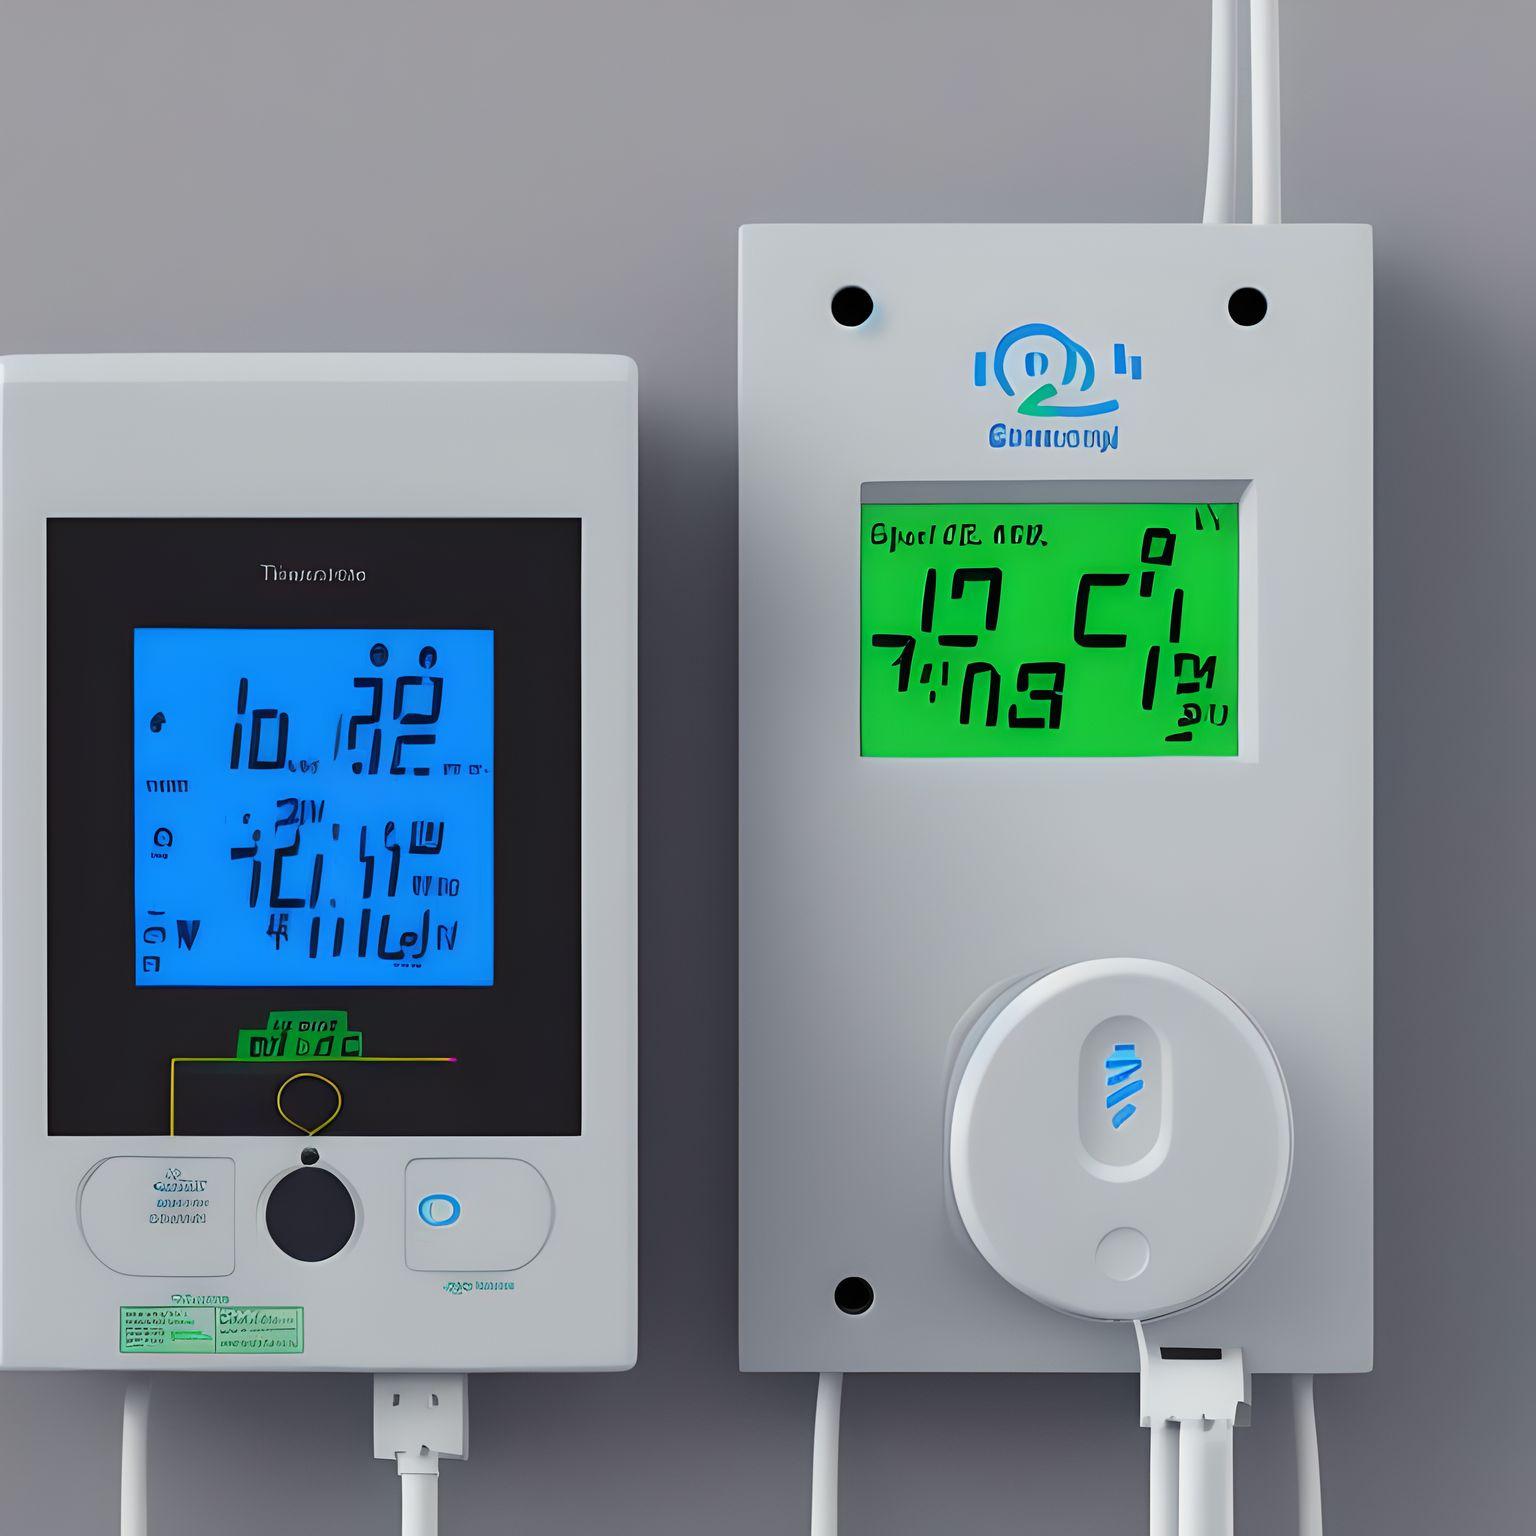 7 Steps to how to turn electricity back on with a smart meter